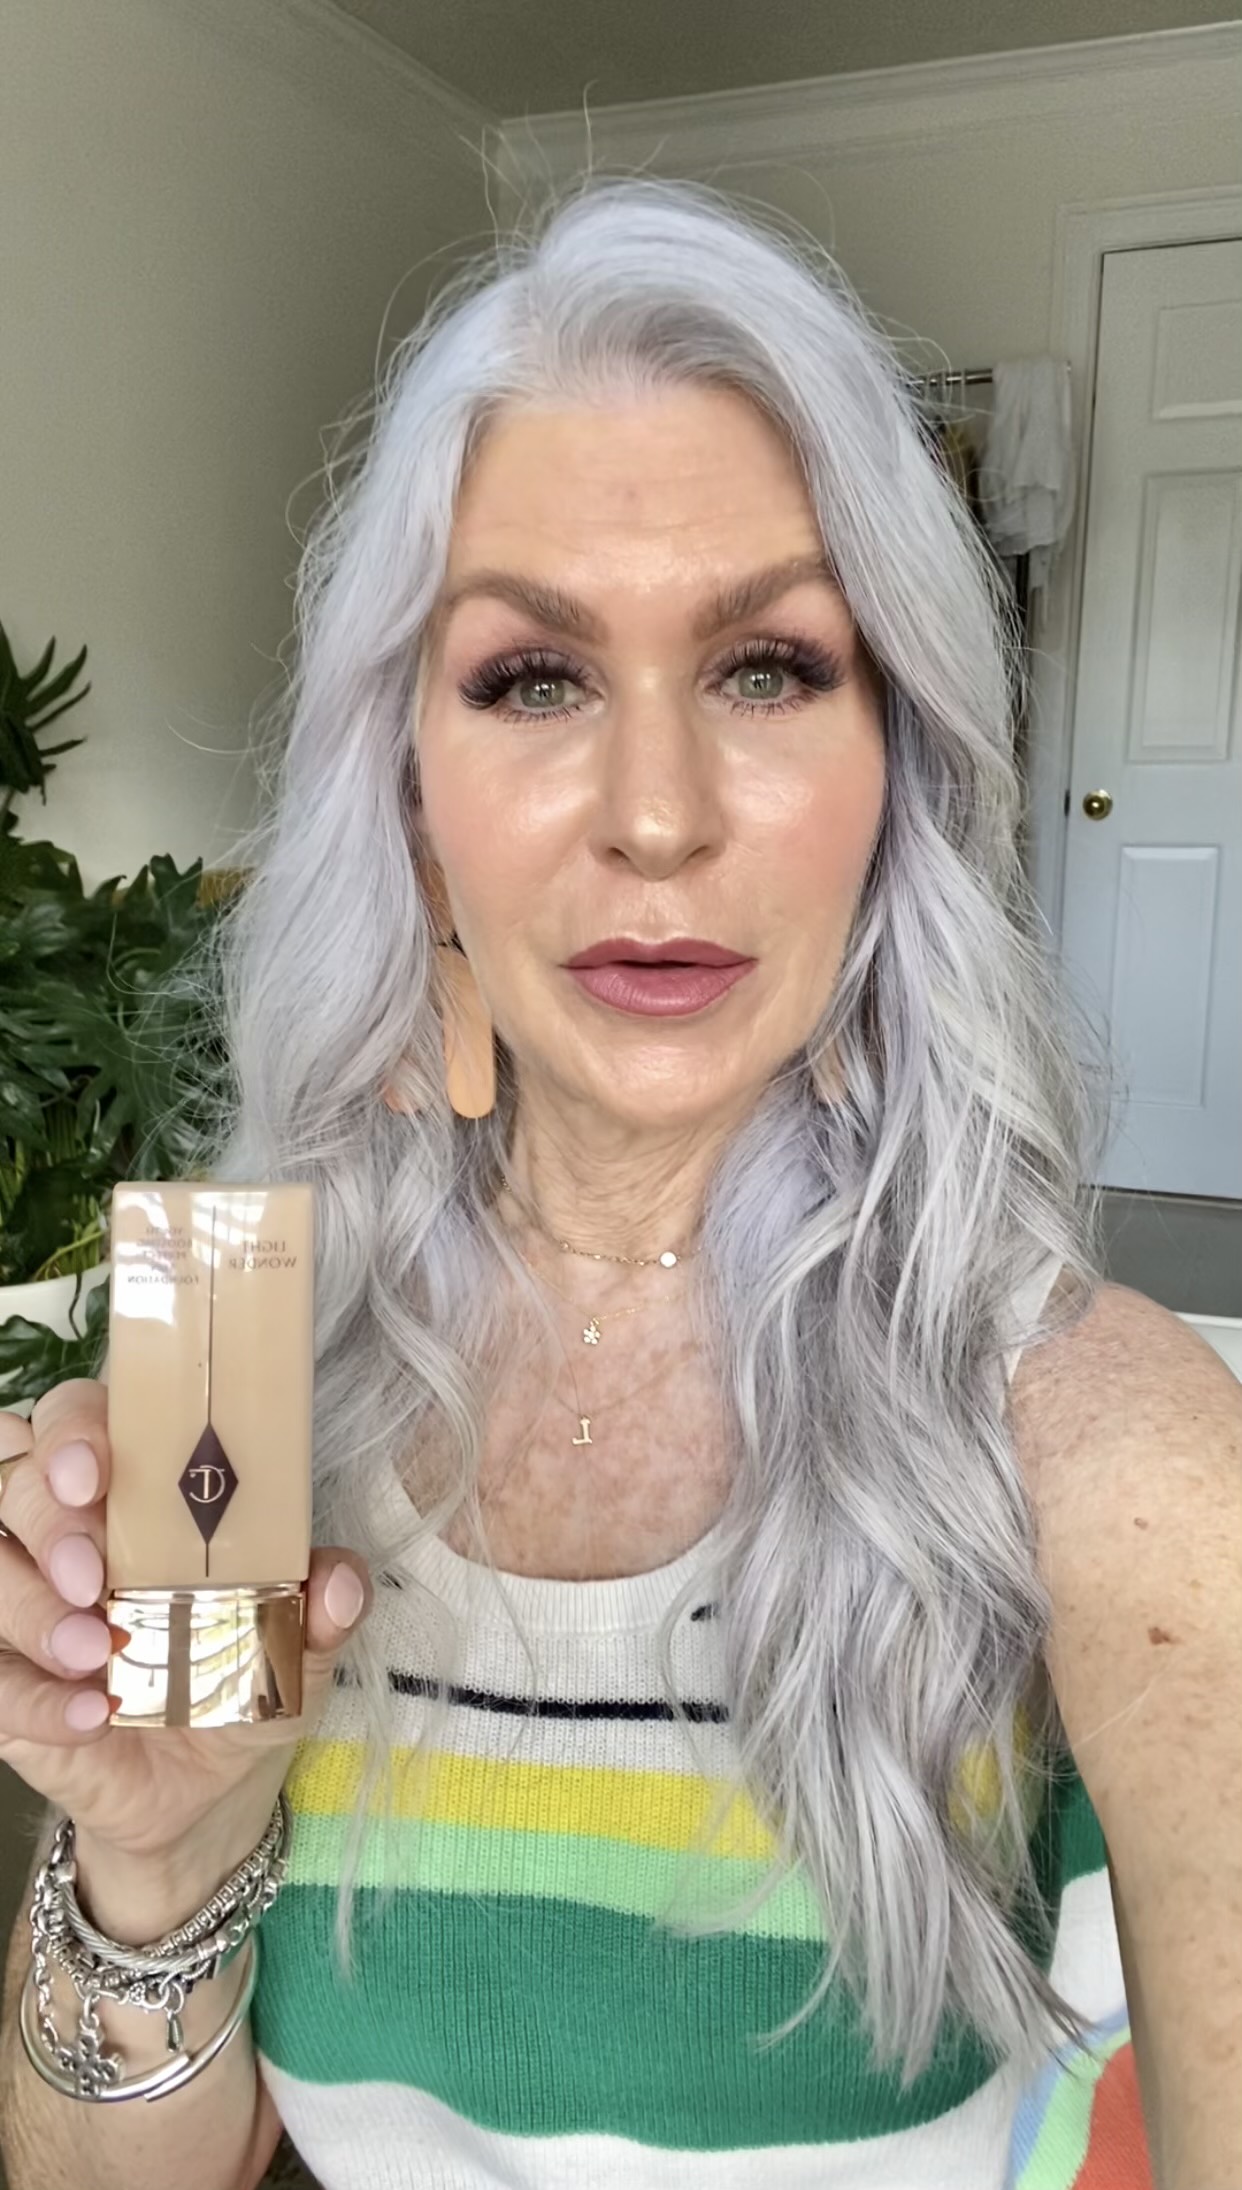 Silver hair lady holding charlotte tillberry foundation